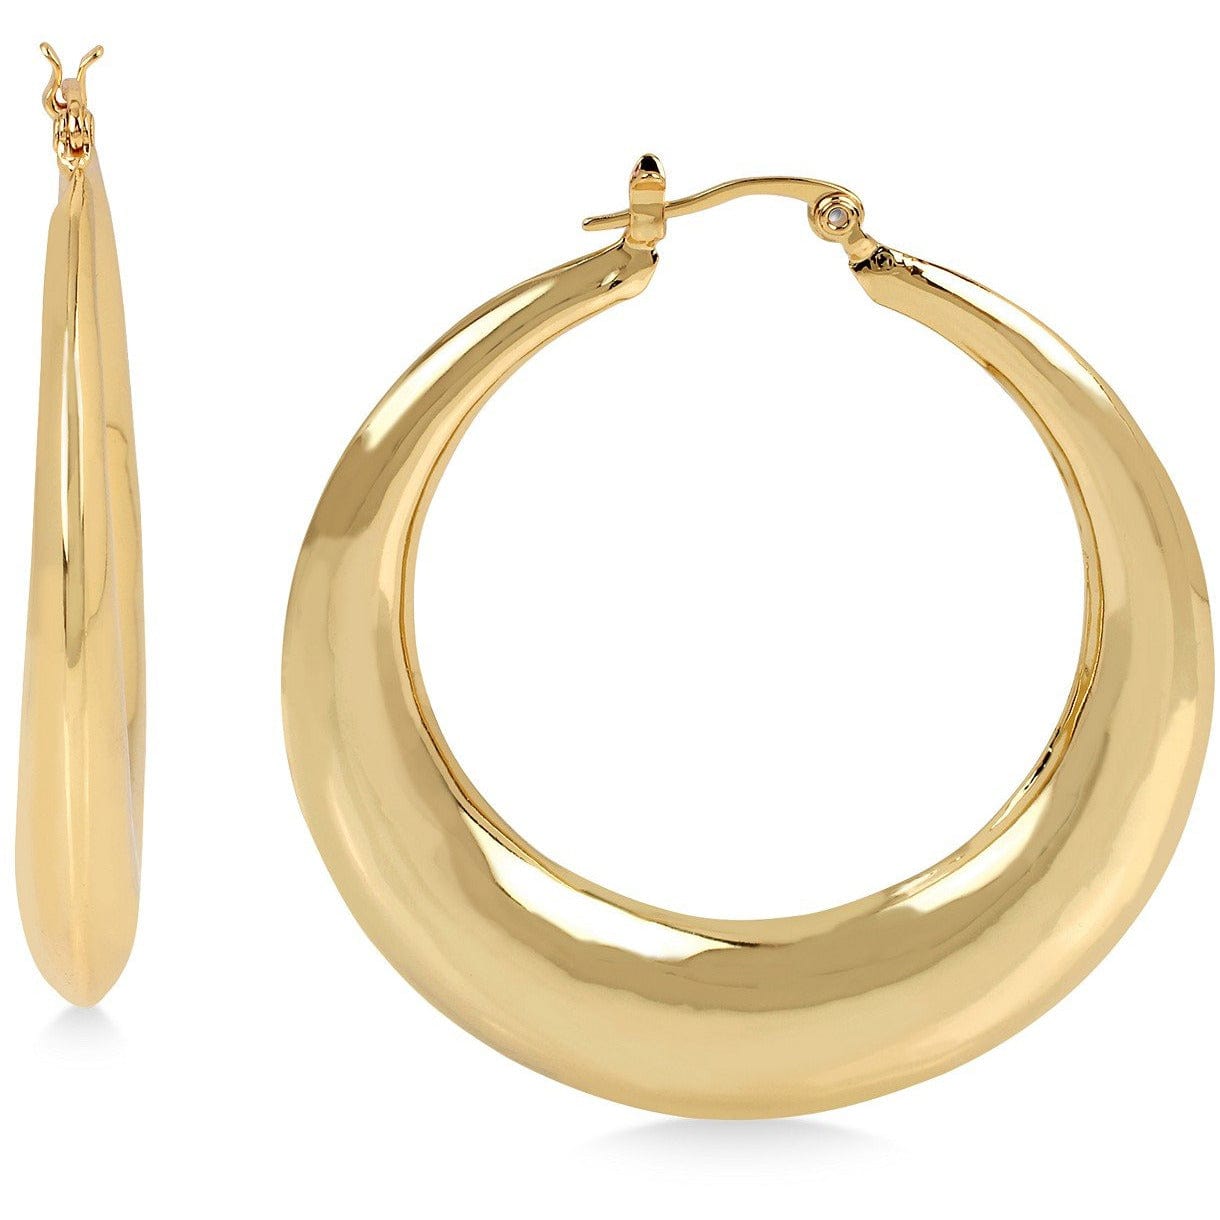 Bamboo Gold Tone Oval Hoop Earrings Thick Bamboo Hoops 2.5 inch Long